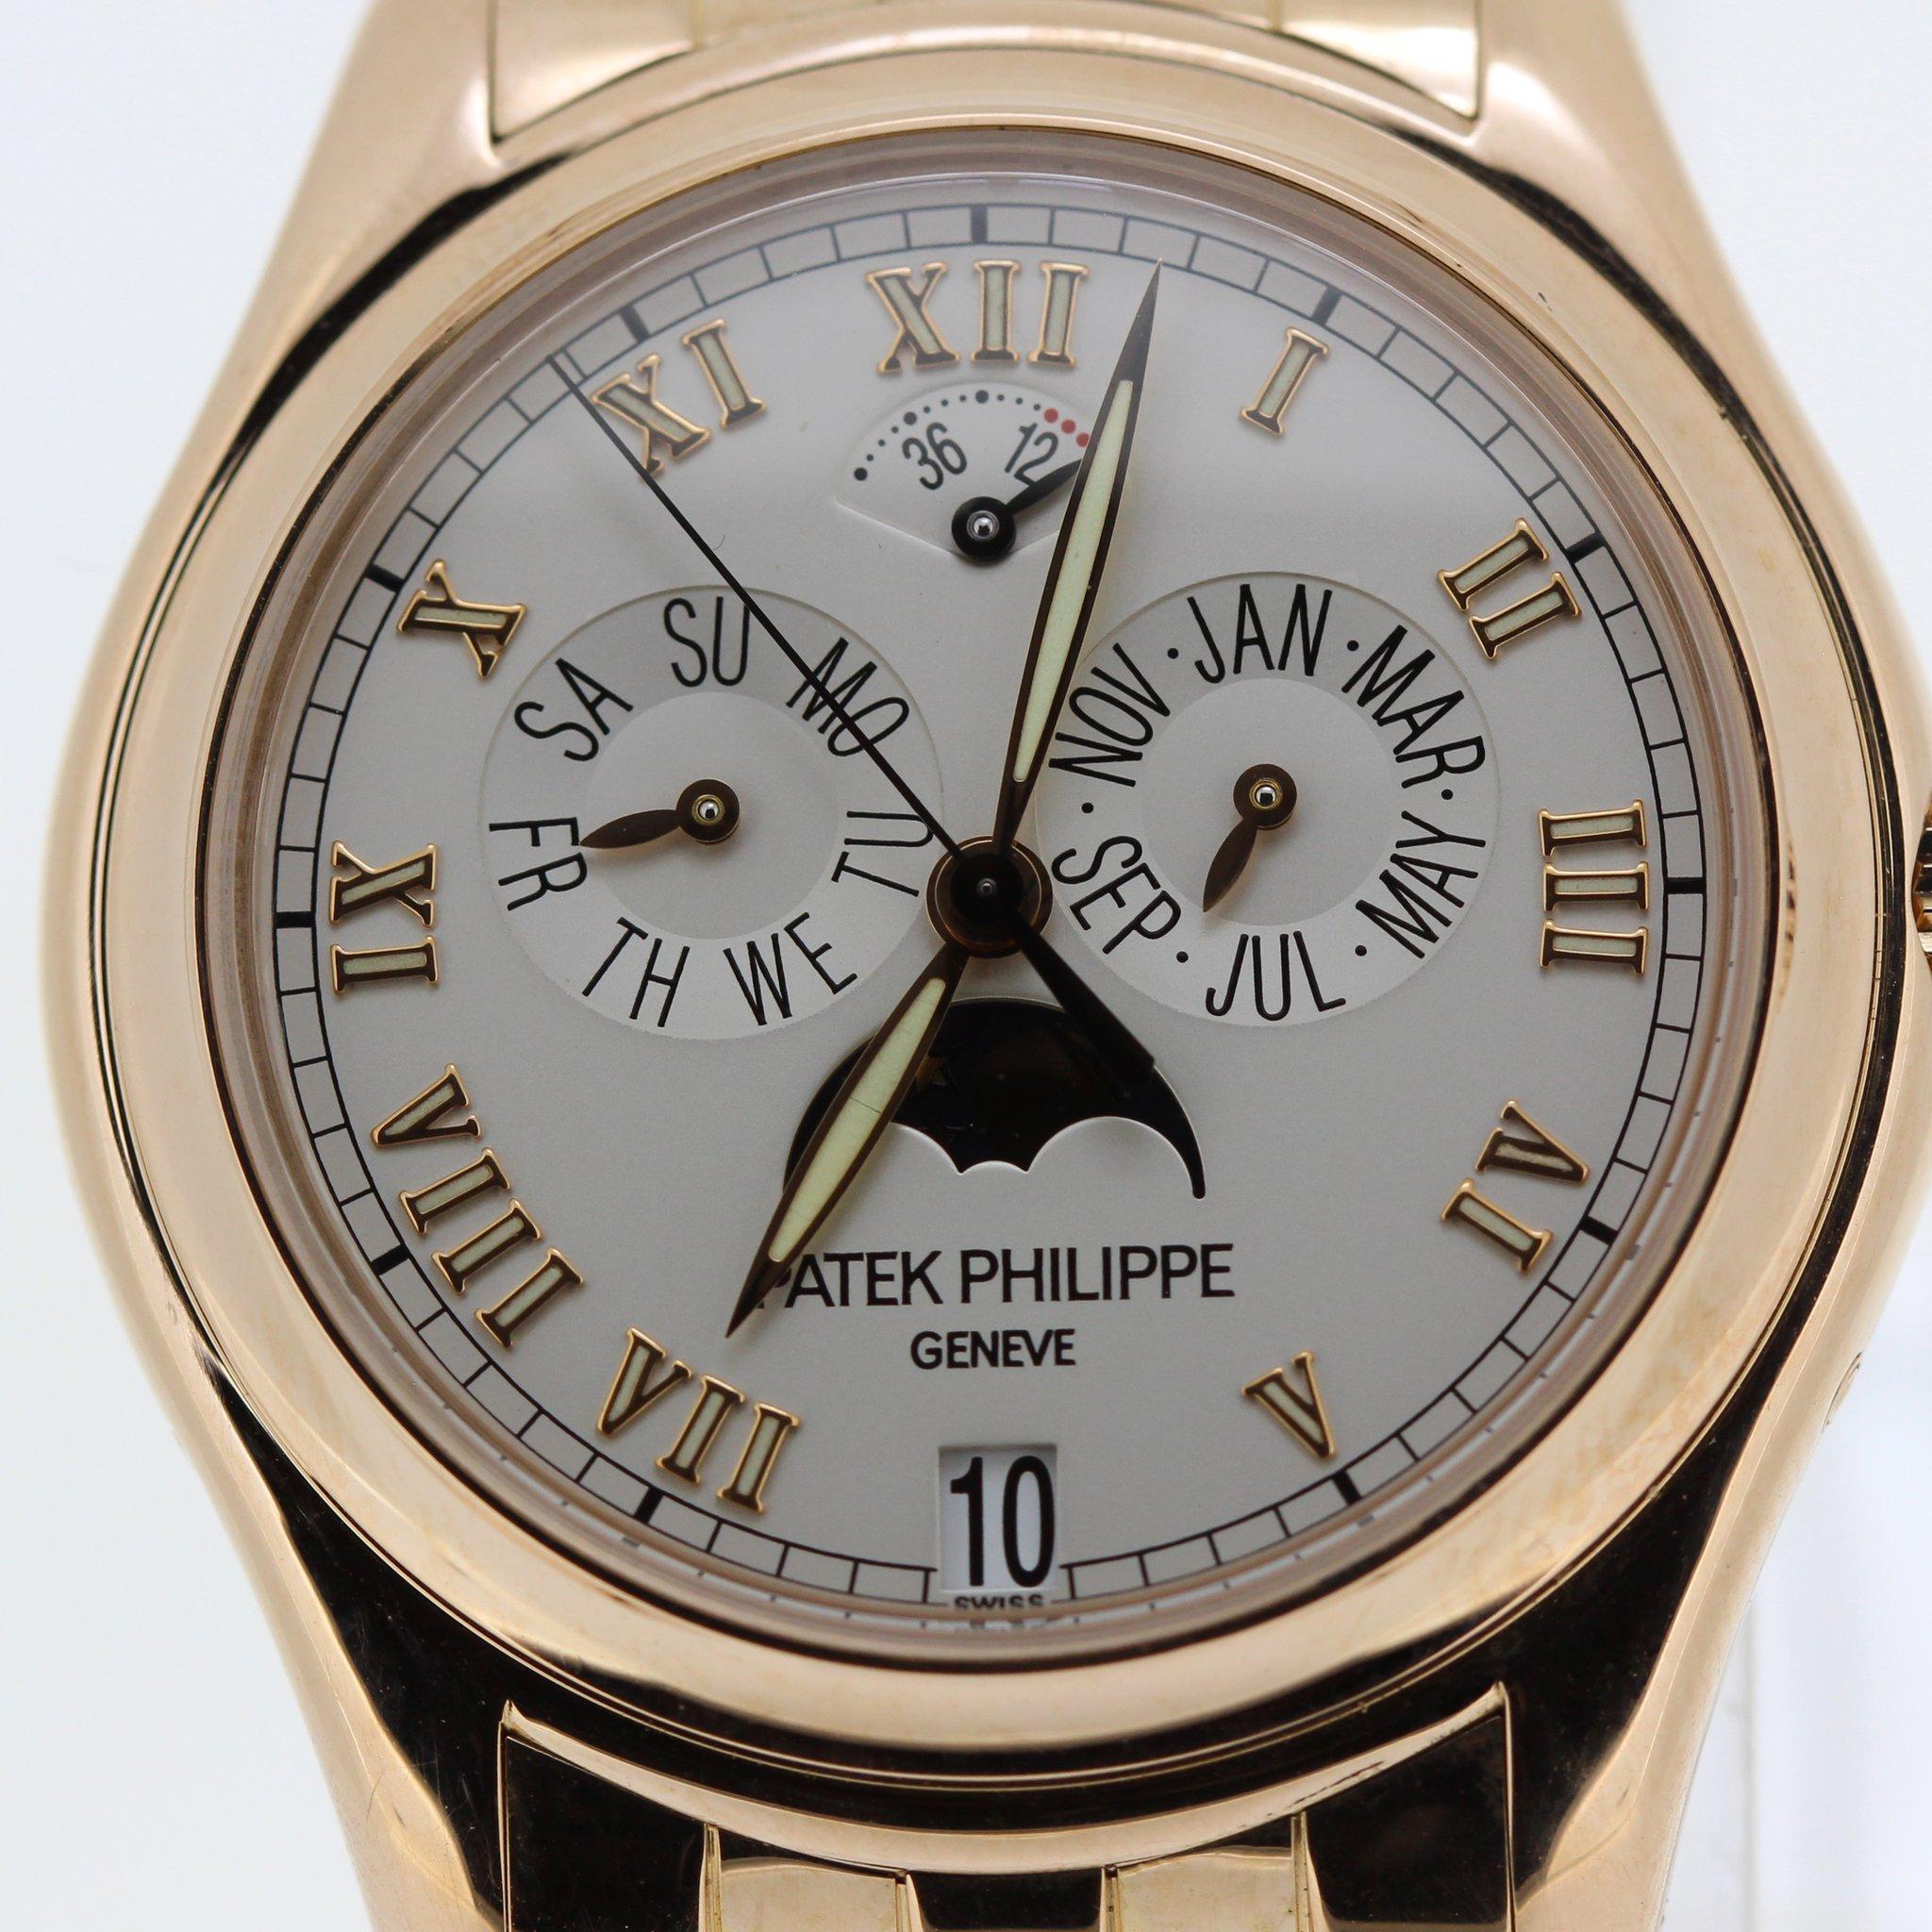 This 5036/1R Annual Calendar Patek Philippe watch features a very rare rose gold bracelet model with 315 SC QA Automatic caliber movement # 3287876, case# 4204738.

The watch was made in 2003.

The watch comes with an extract from the archives